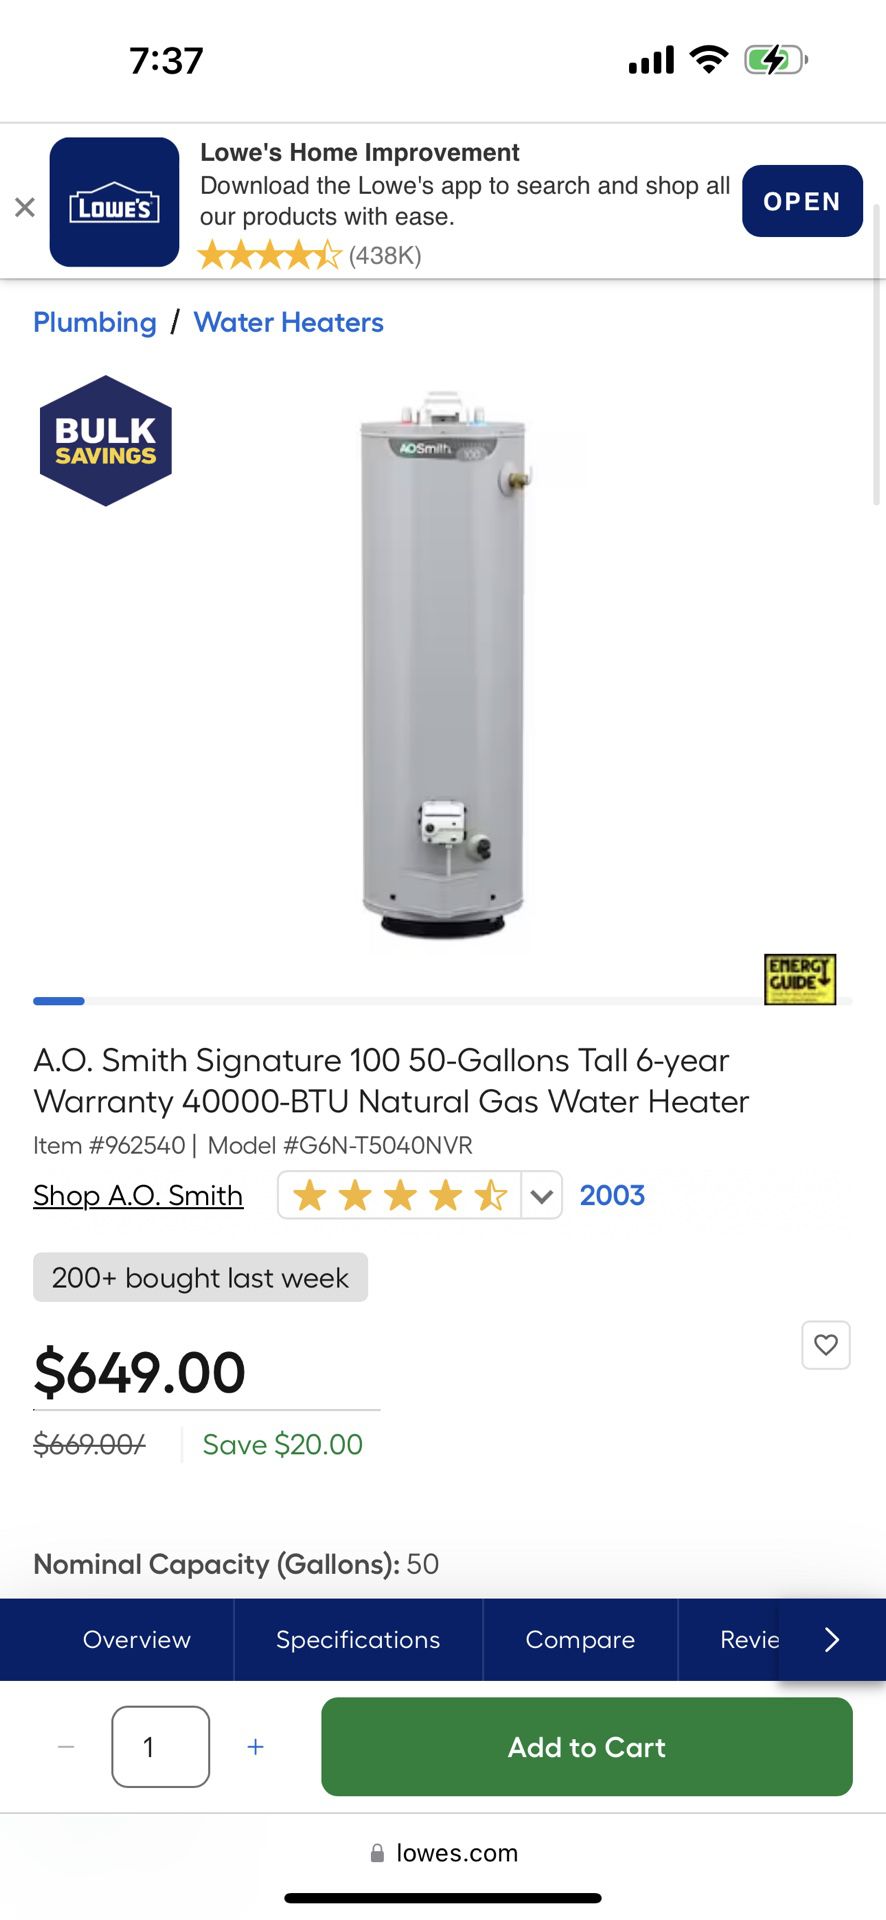 Brand New | A.O. Smith Signature 100 50-Gallons Tall 6-year Warranty 40000-BTU Natural Gas Water Heater